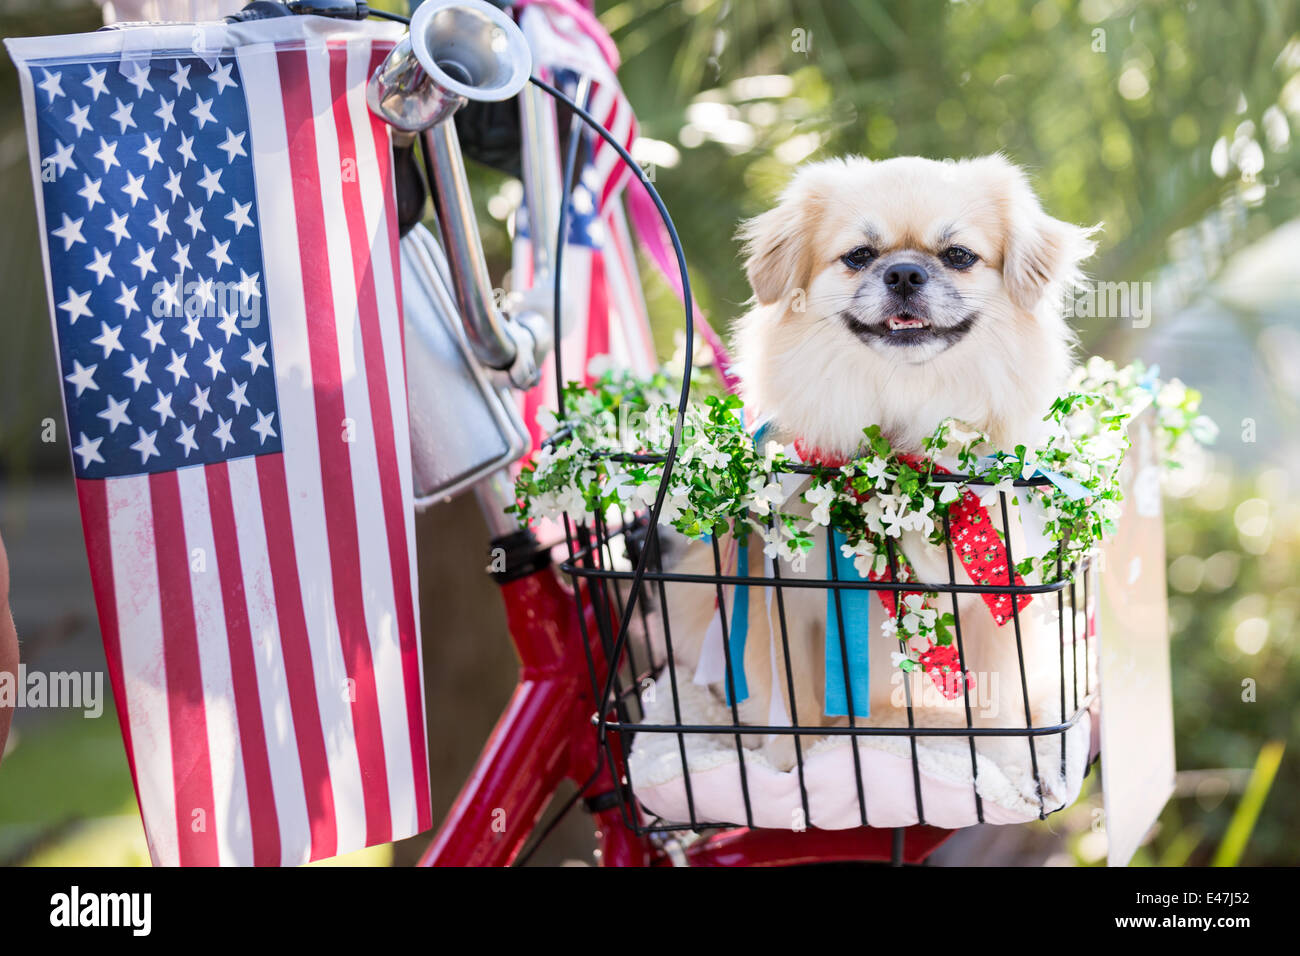 A dog rides in a bicycle basket decorated in flags during the I'On community Independence Day parade July 4, 2014 in Mt Pleasant, South Carolina. Stock Photo